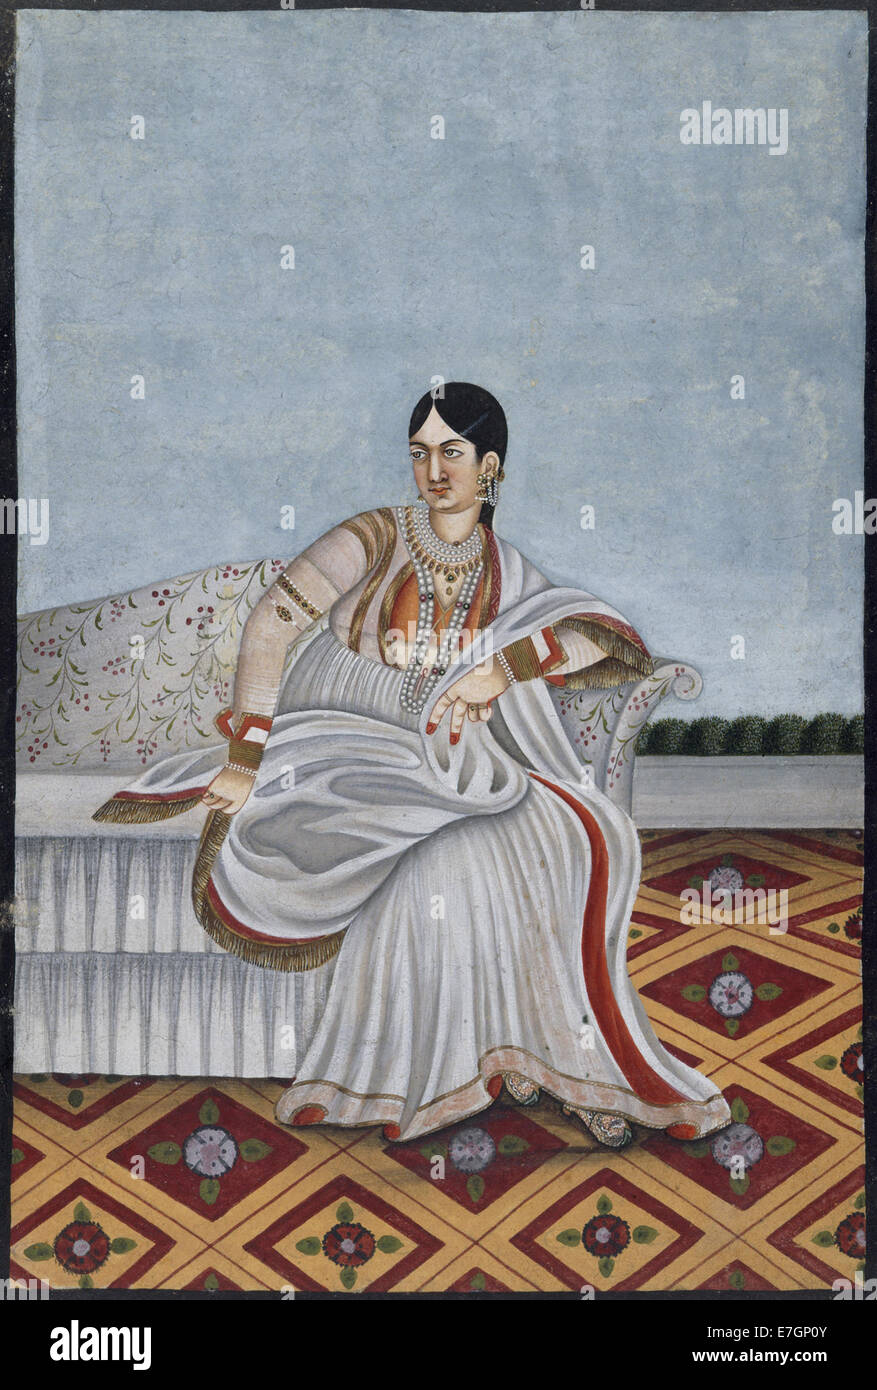 A portrait of an Indian dancing girl, c.1780-1790 - BL Add.Or.2659 Stock Photo